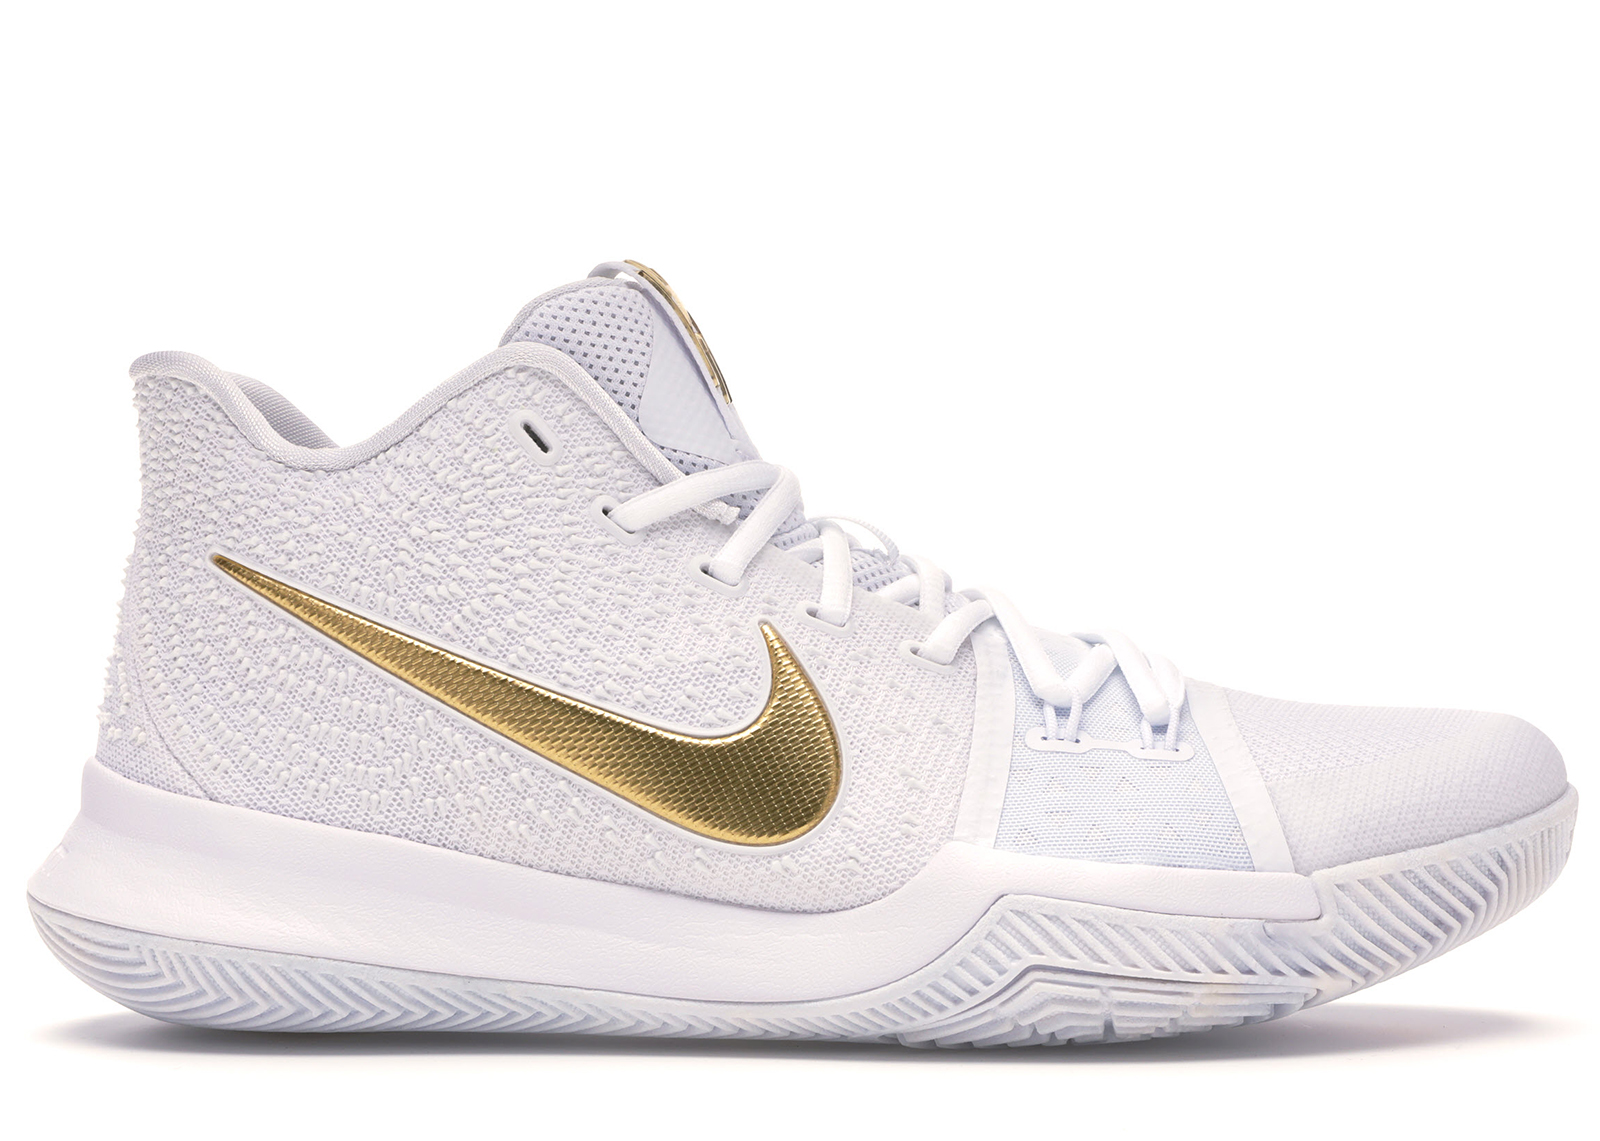 Nike Kyrie 3 Finals Gold